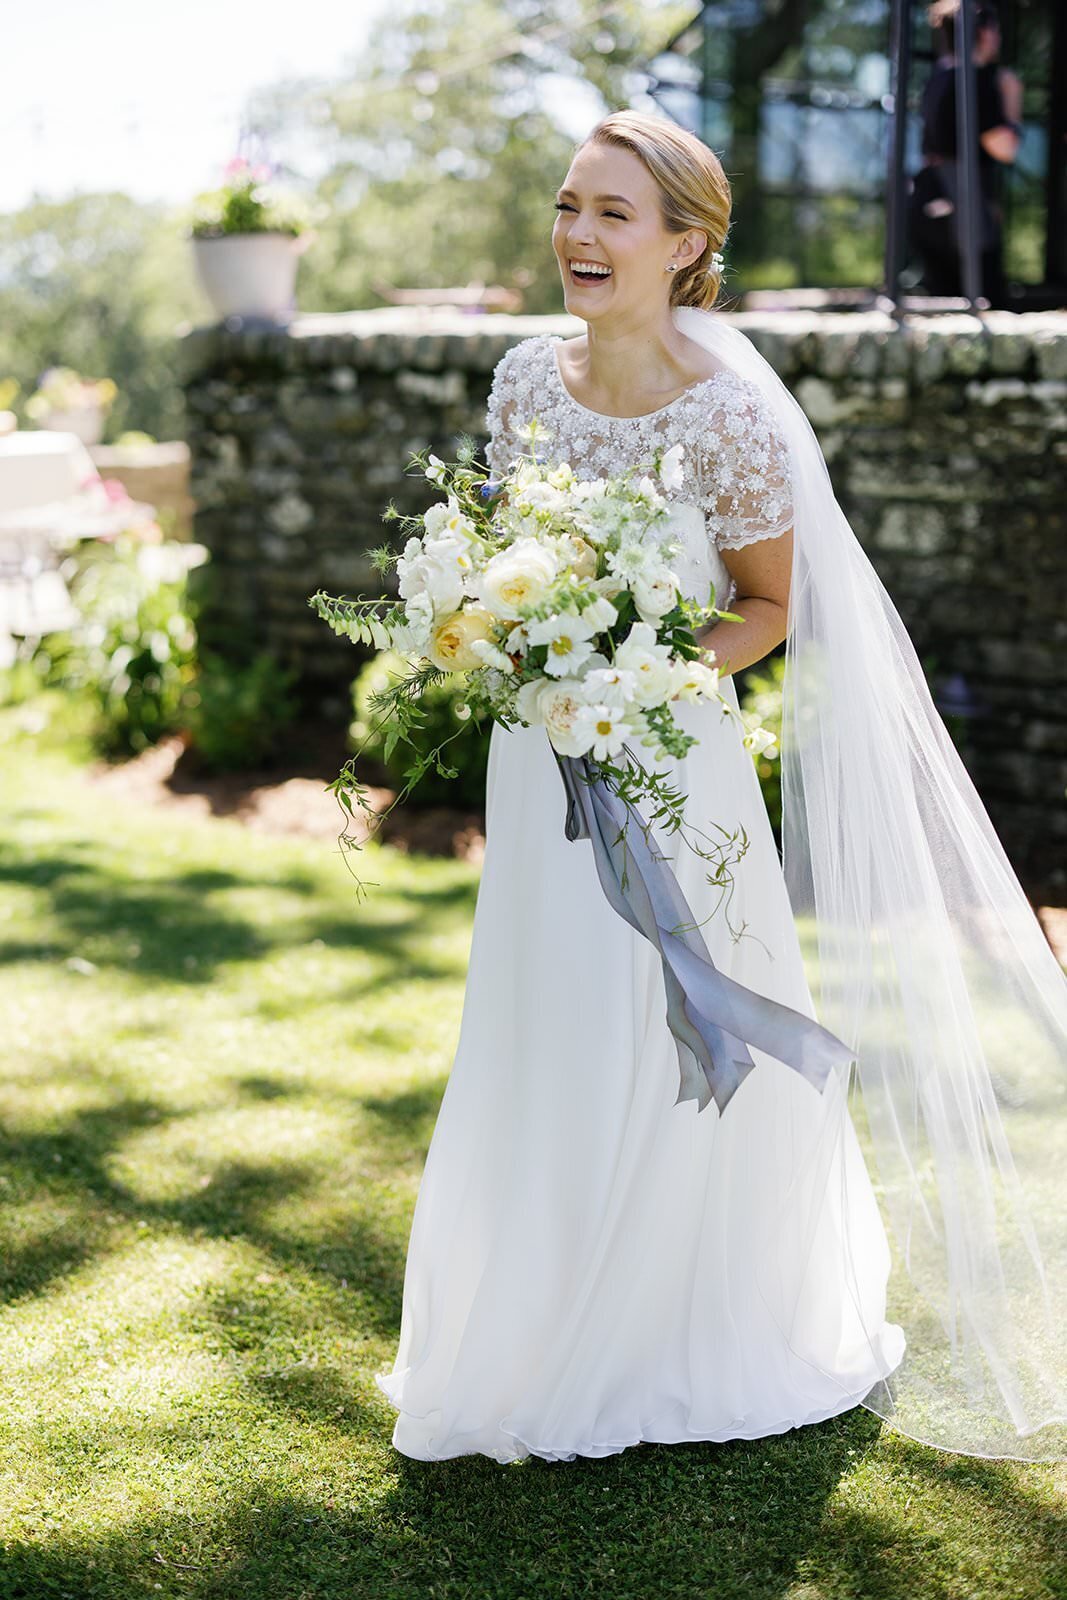 Bride laughs while holding wedding bouquet